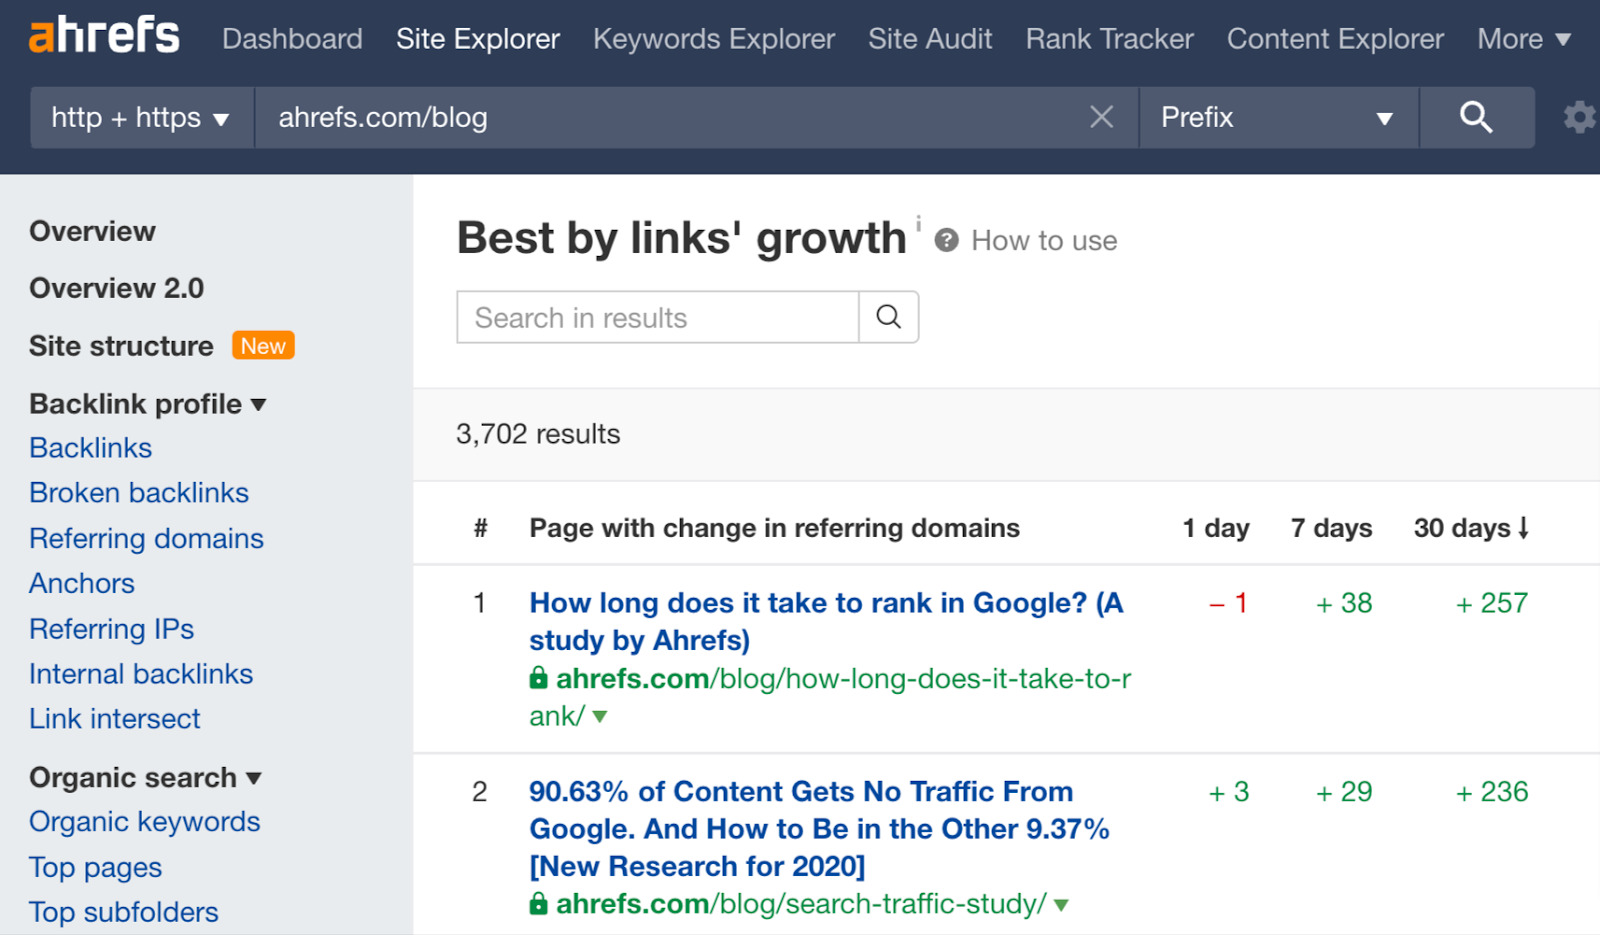 Best by links' growth report for Ahrefs' blog in Ahrefs' Site Explorer 